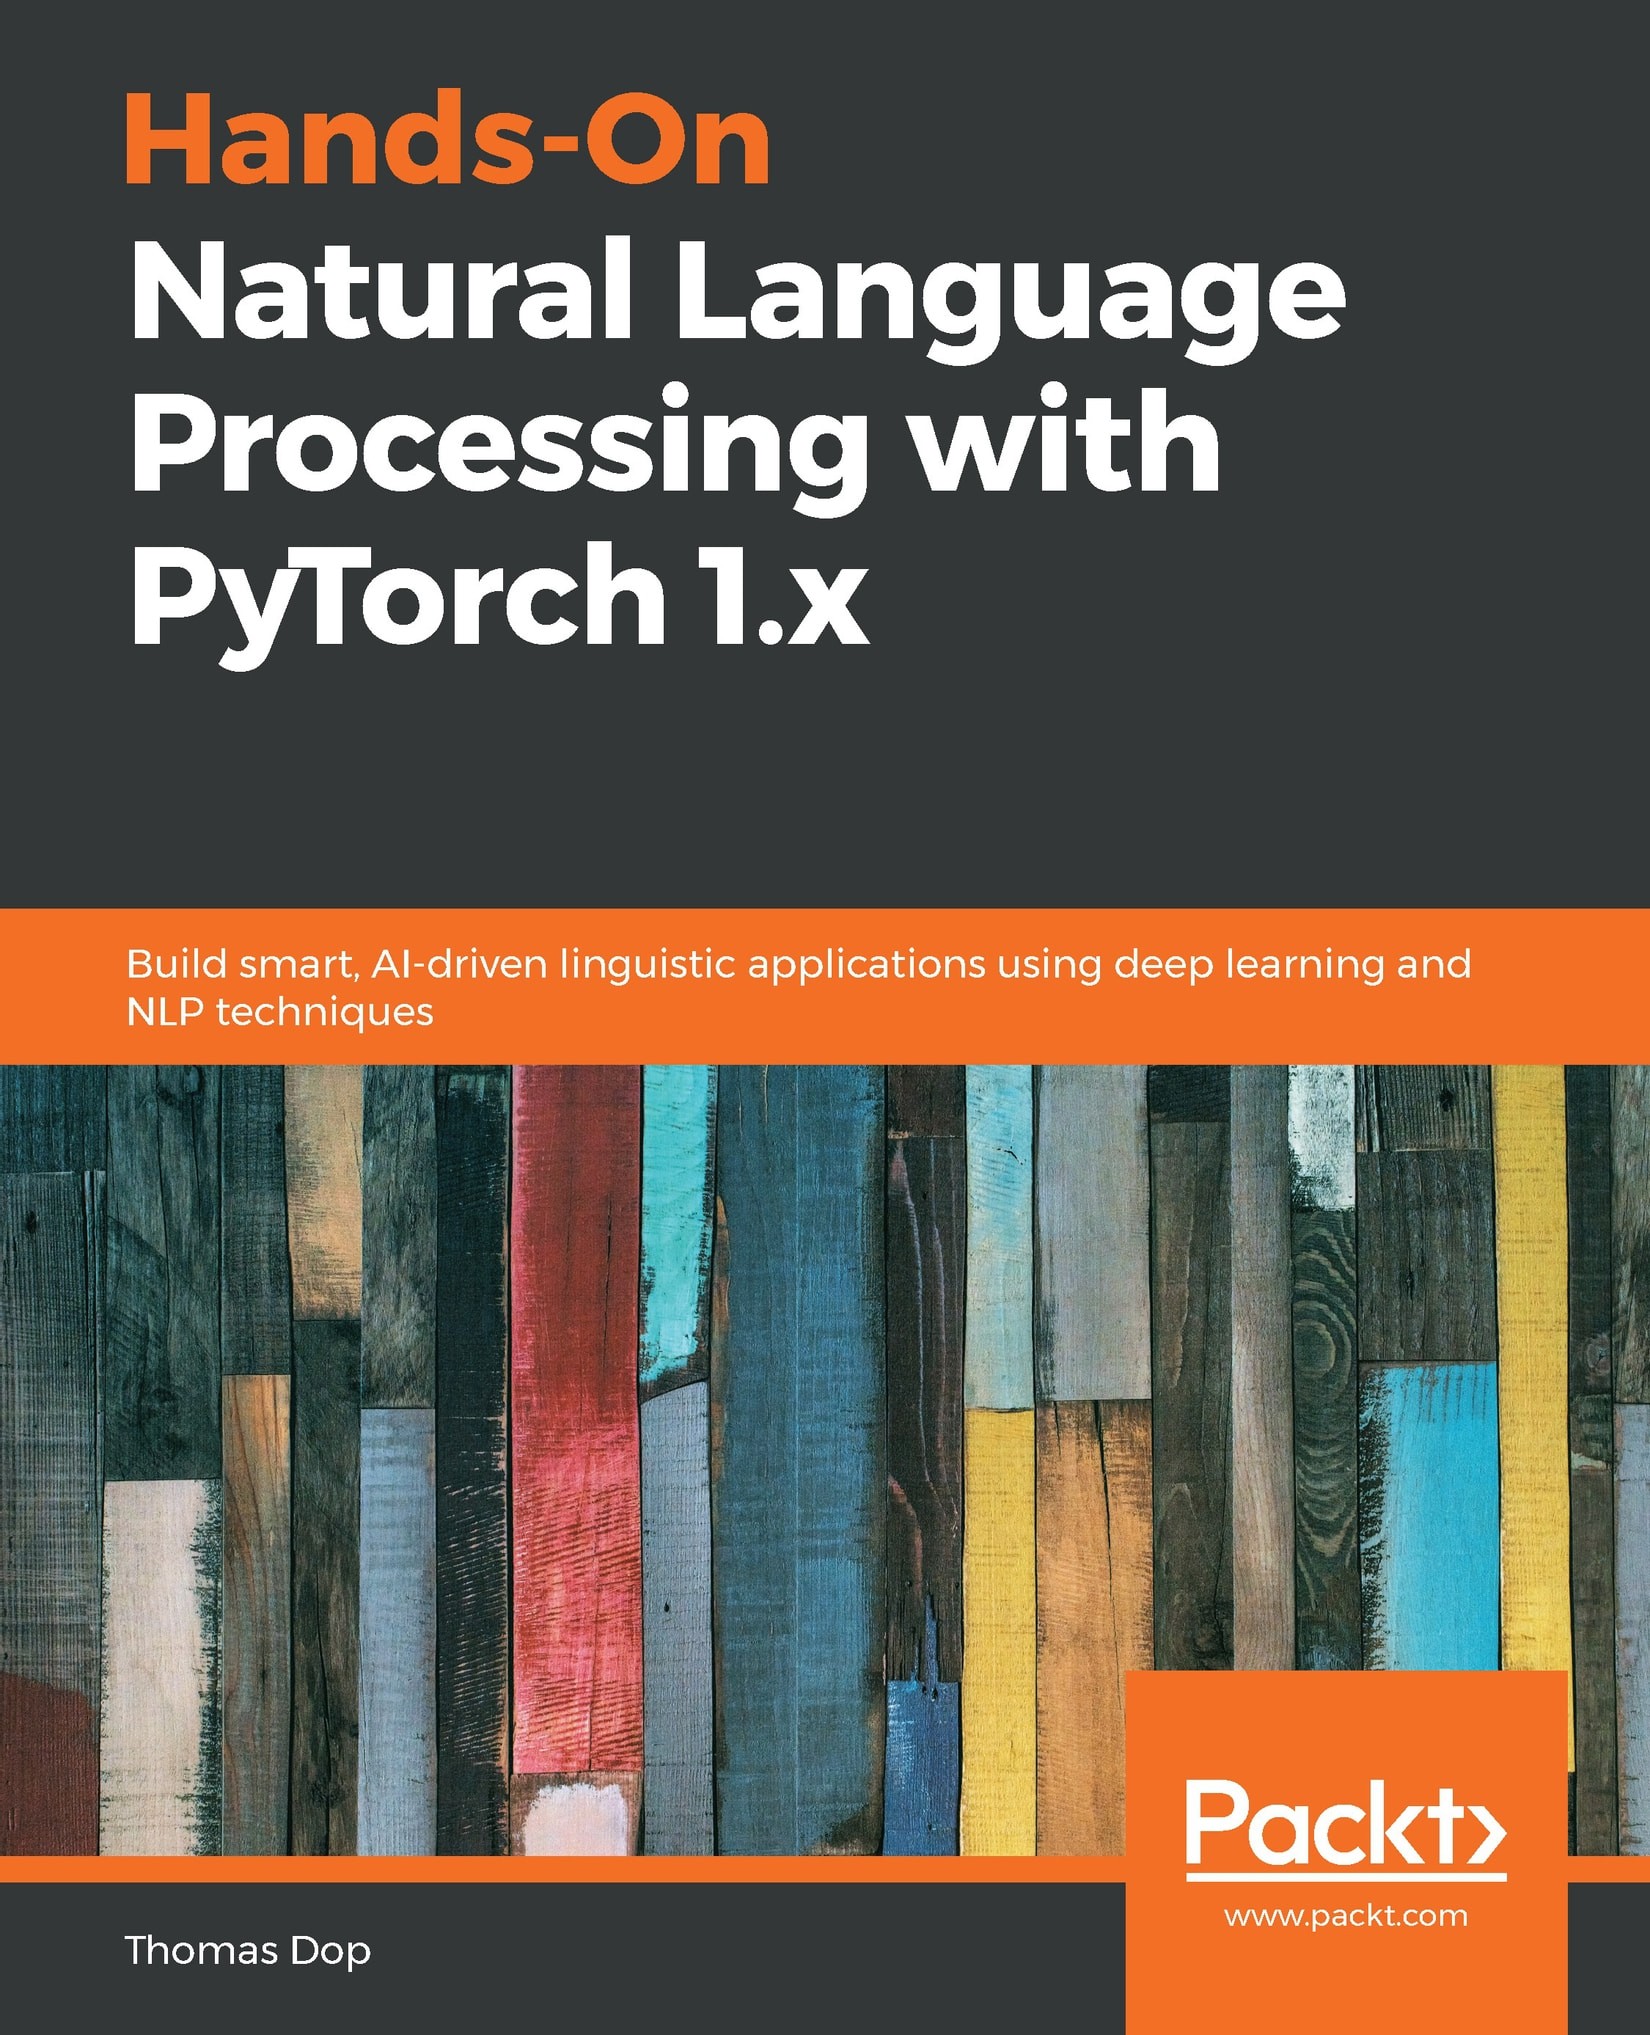 Hands-On Natural Language Processing with PyTorch 1.x: Build Smart, AI-driven Linguistic Applications using Deep Learning and NLP Techniques